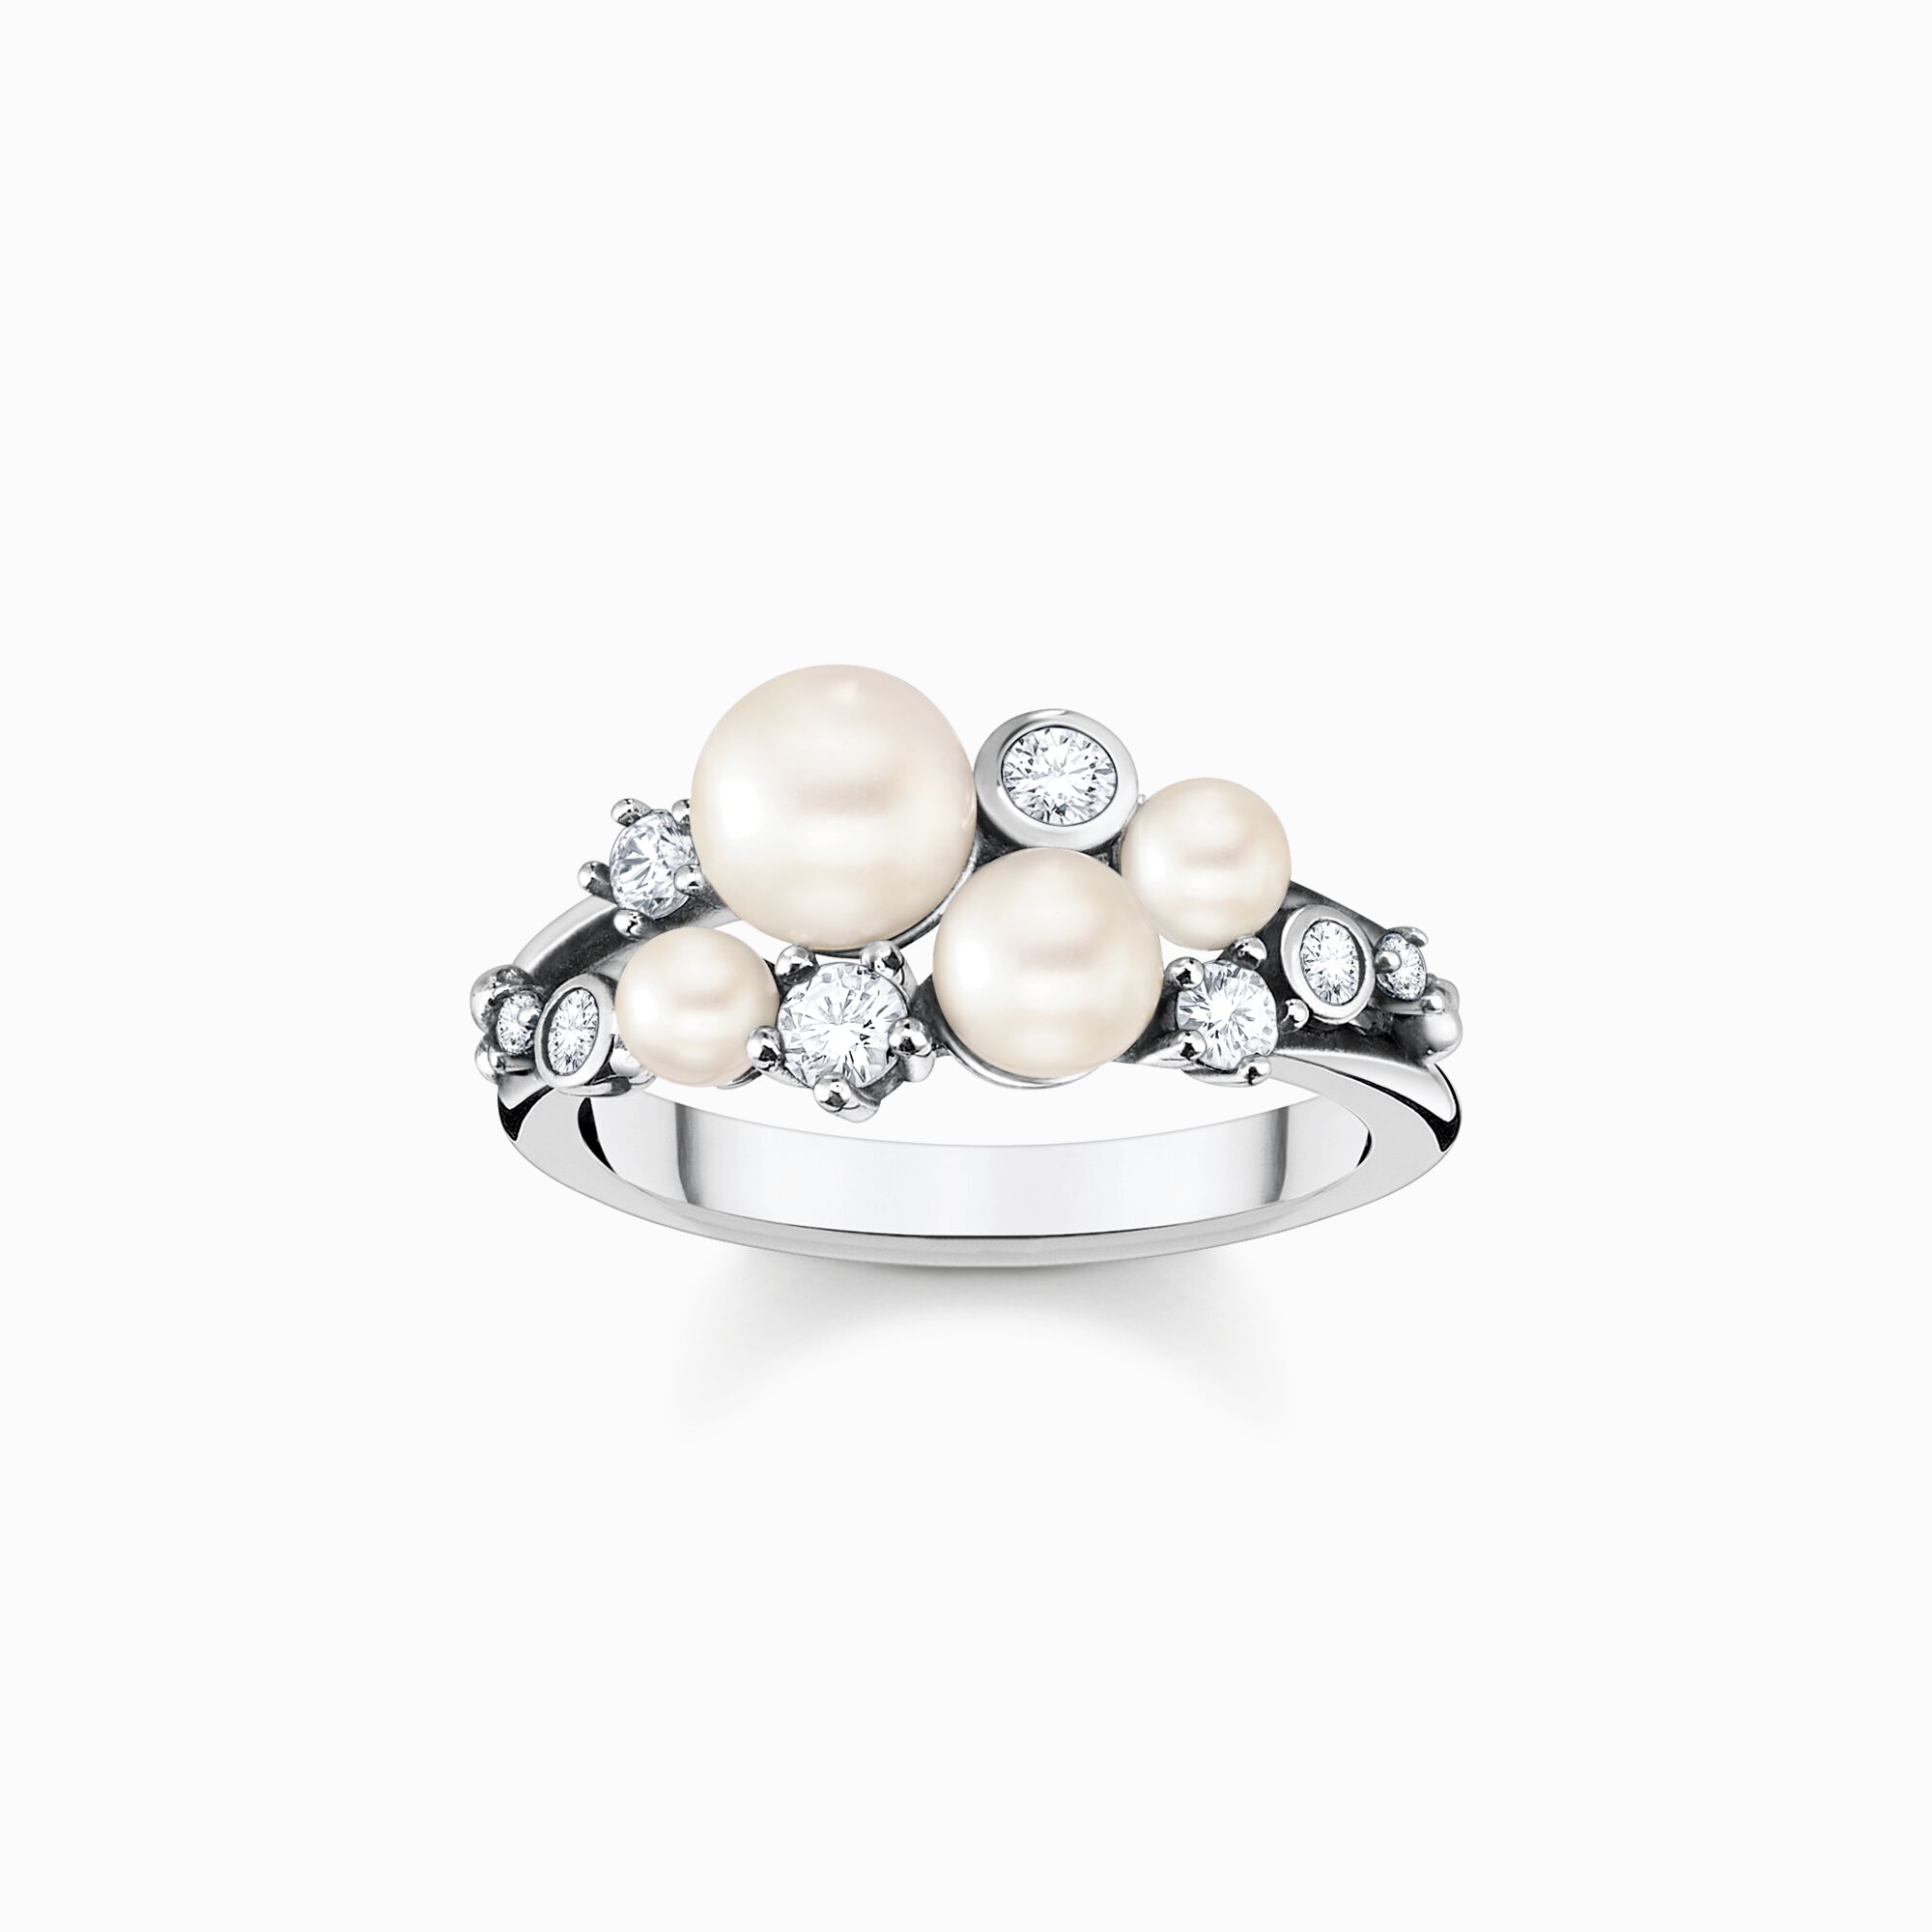 Kruik Staat vergeetachtig Pearl ring for women with exclusive design | THOMAS SABO